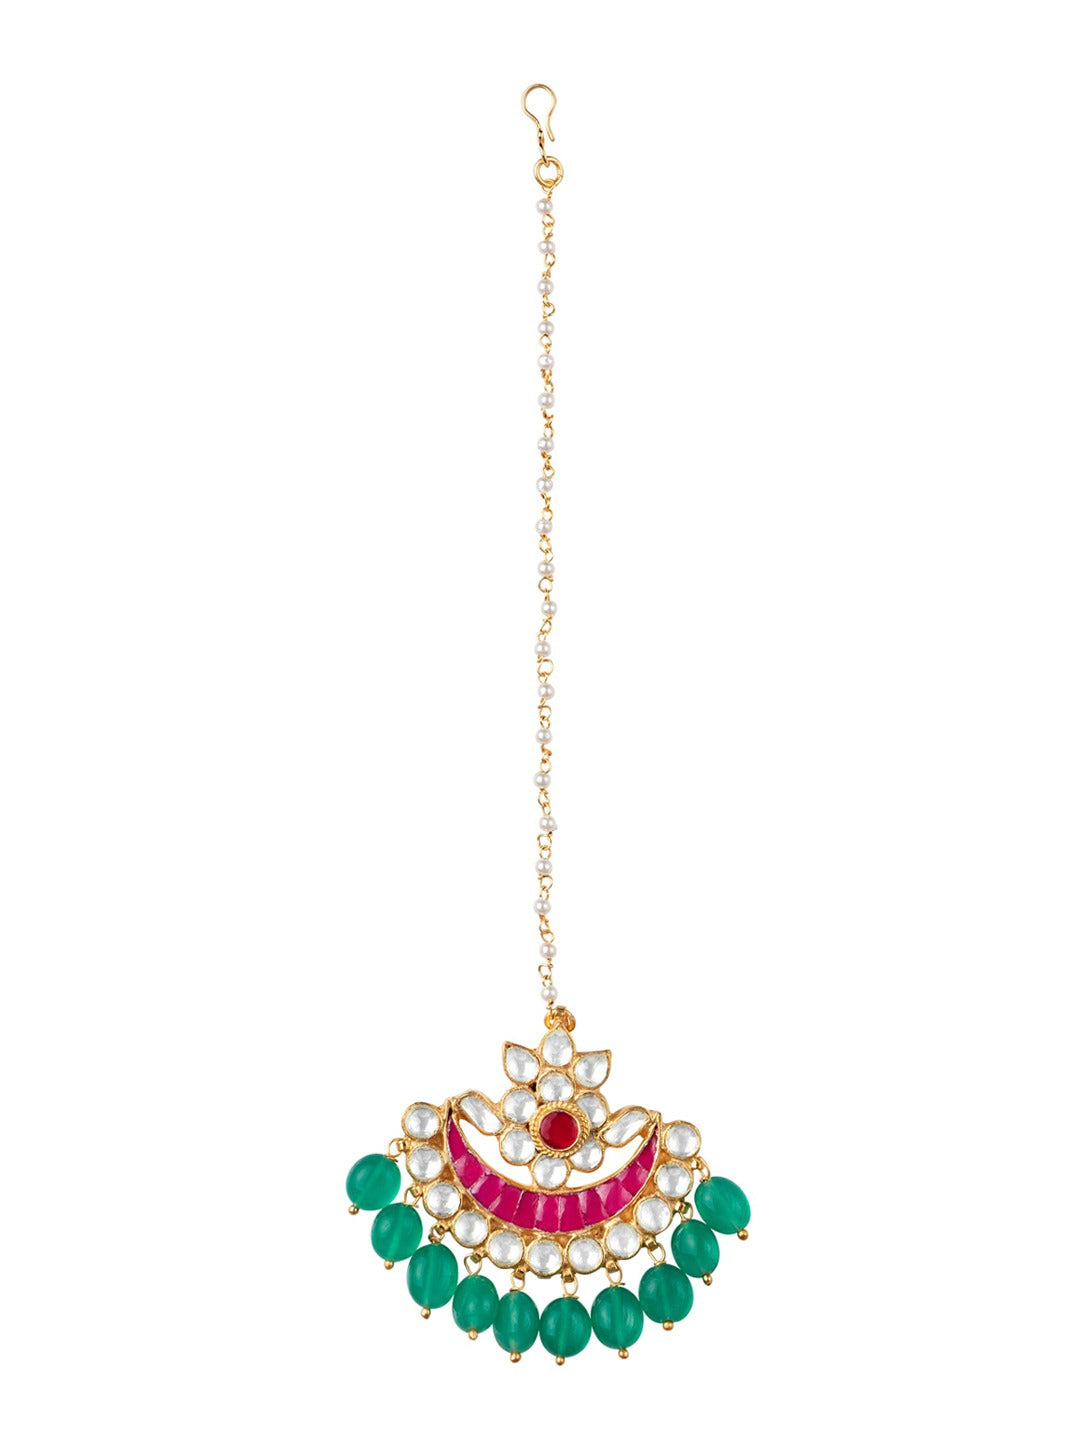 Women's Gold-Plated White & Pink Kundan-Studded Handcrafted Maang Tikka - Morkanth